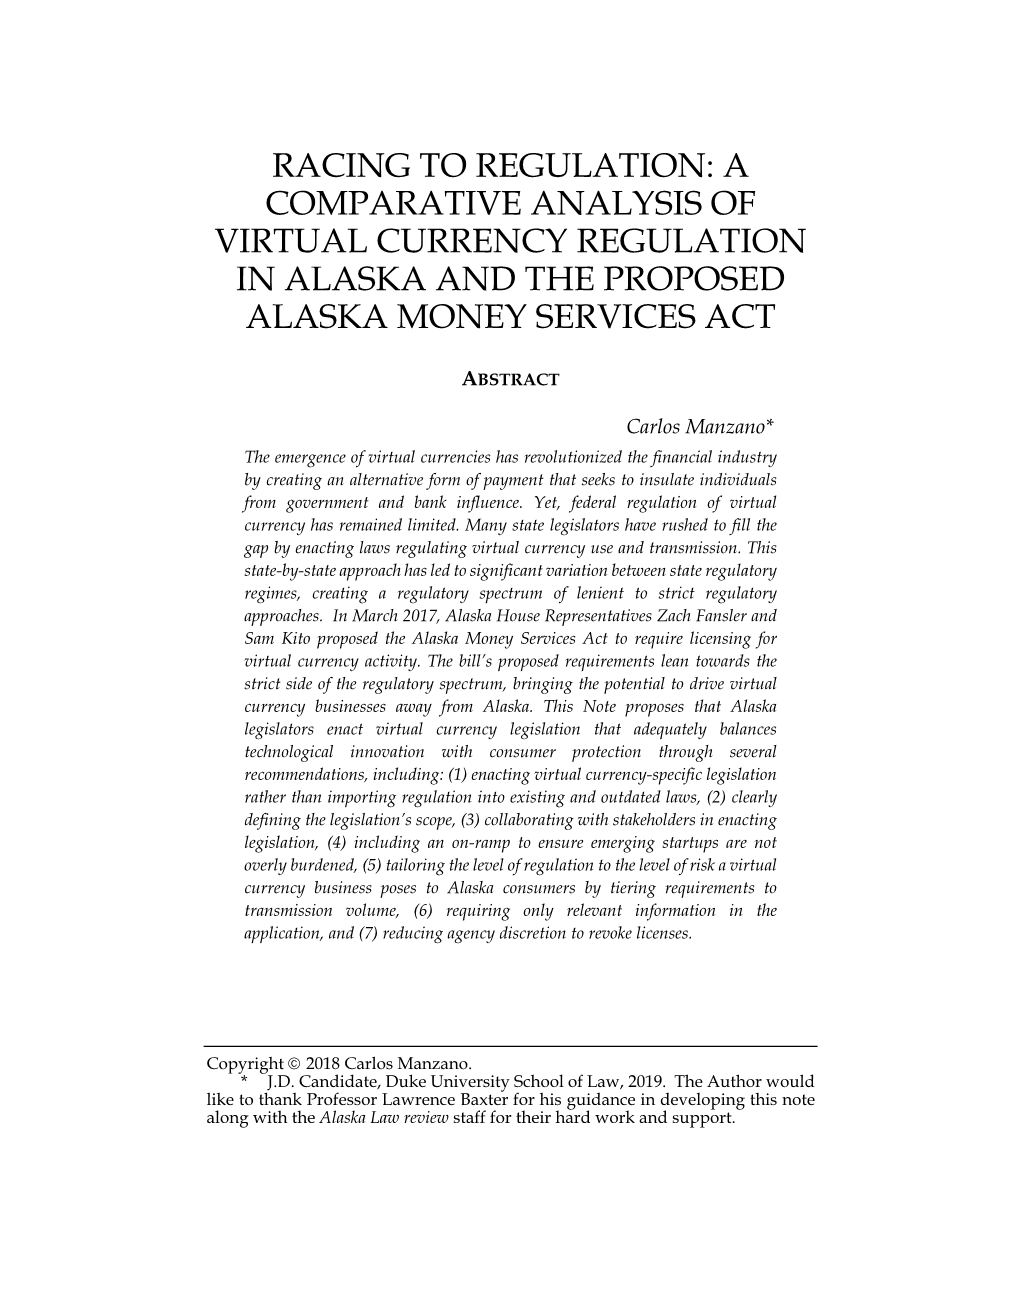 A Comparative Analysis of Virtual Currency Regulation in Alaska and the Proposed Alaska Money Services Act